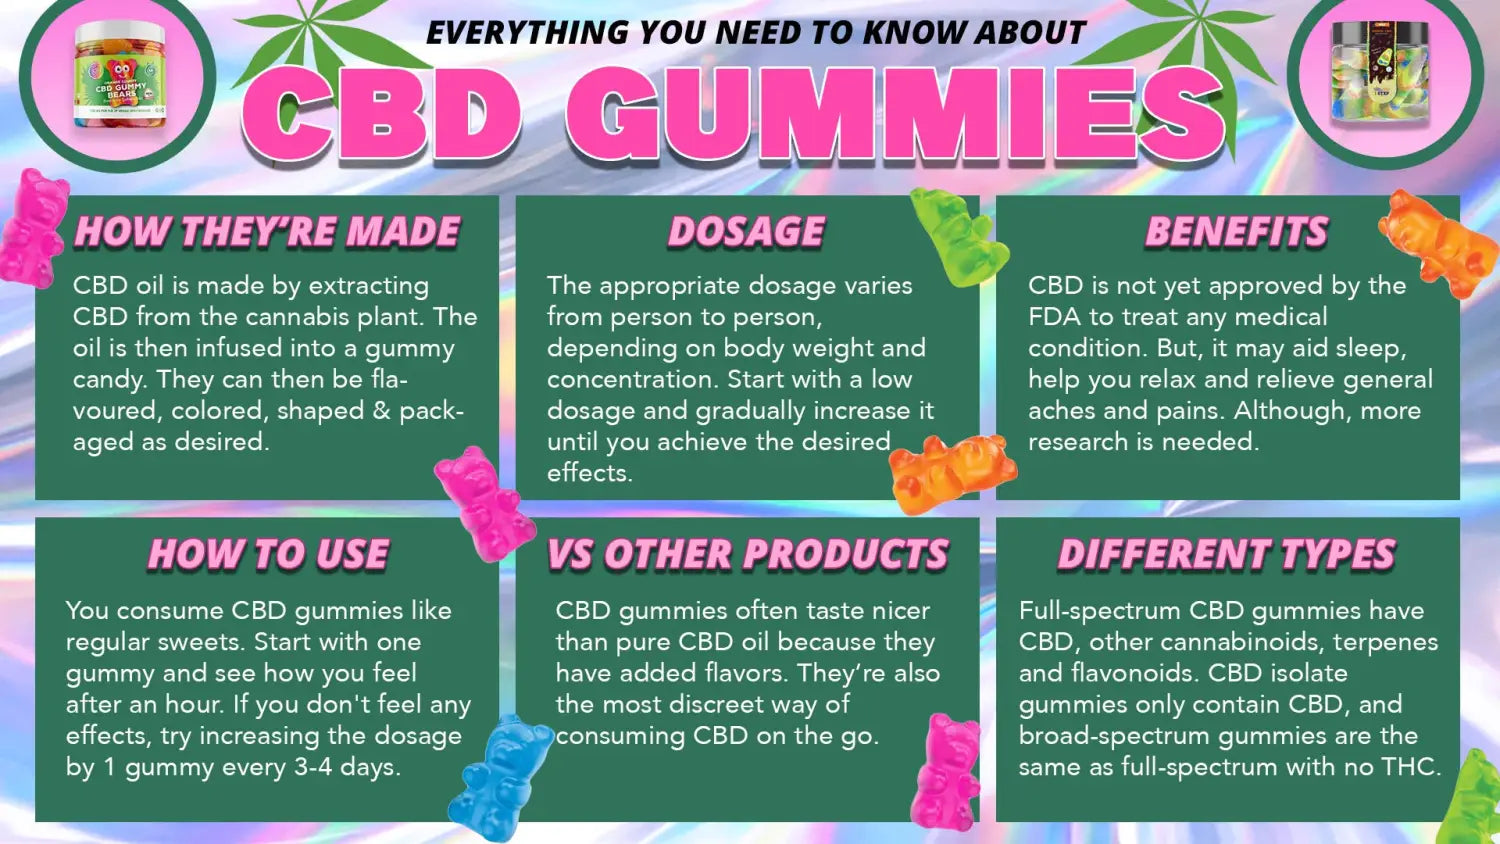 CBD Gummies: The Good, The Bad, And The Ugly